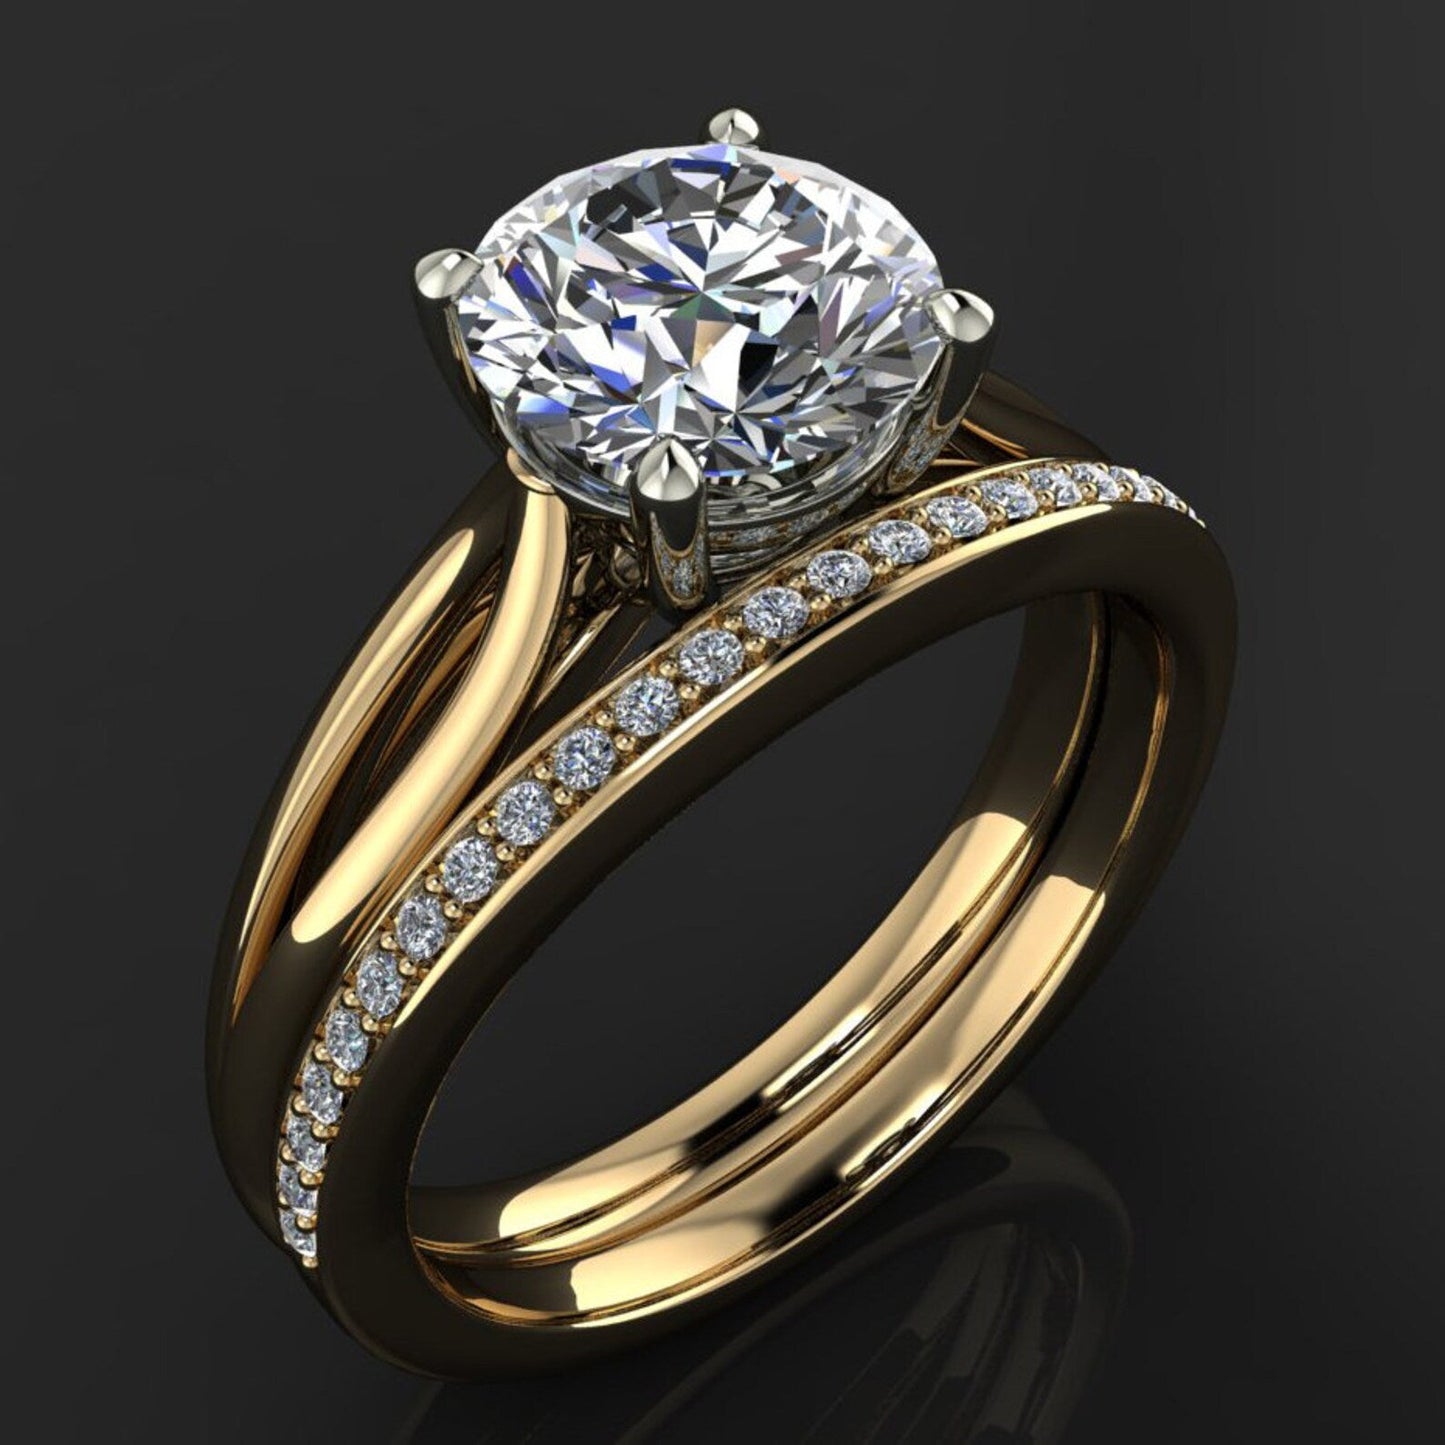 victoria ring - 1.5 carat diamond cut round NEO moissanite engagement ring, two tone ring - J Hollywood Designs